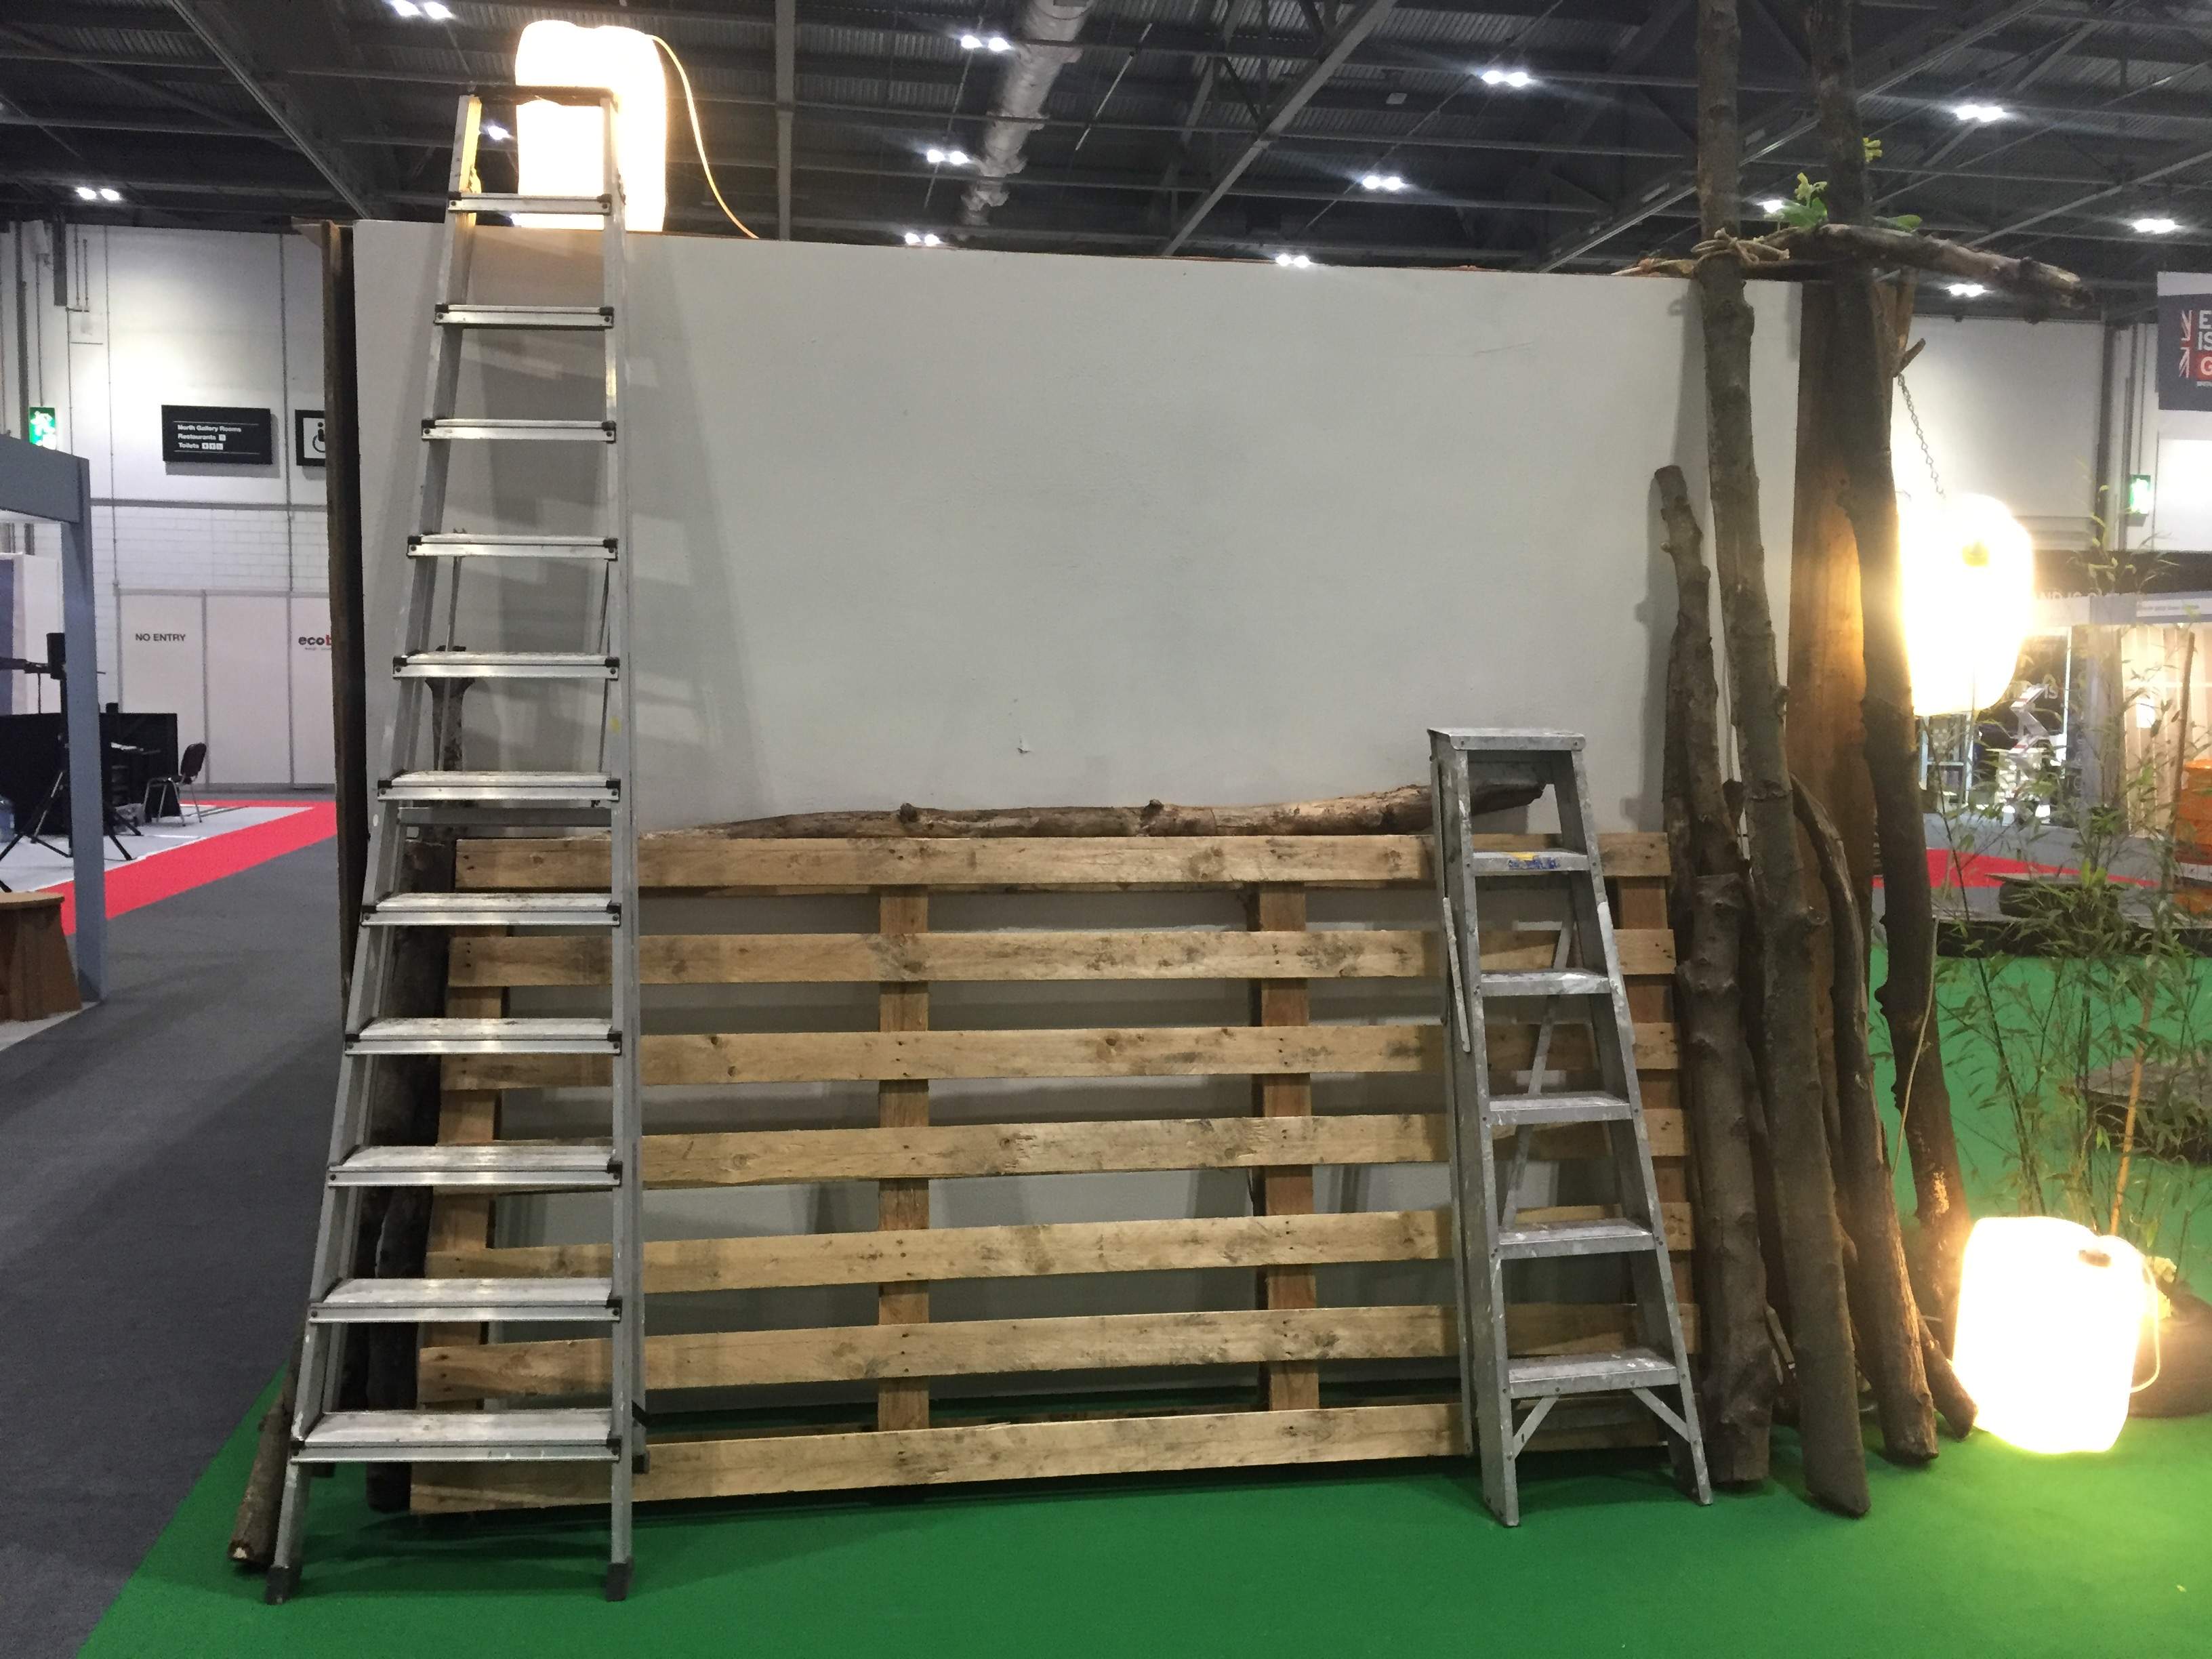 Pallets and ladders